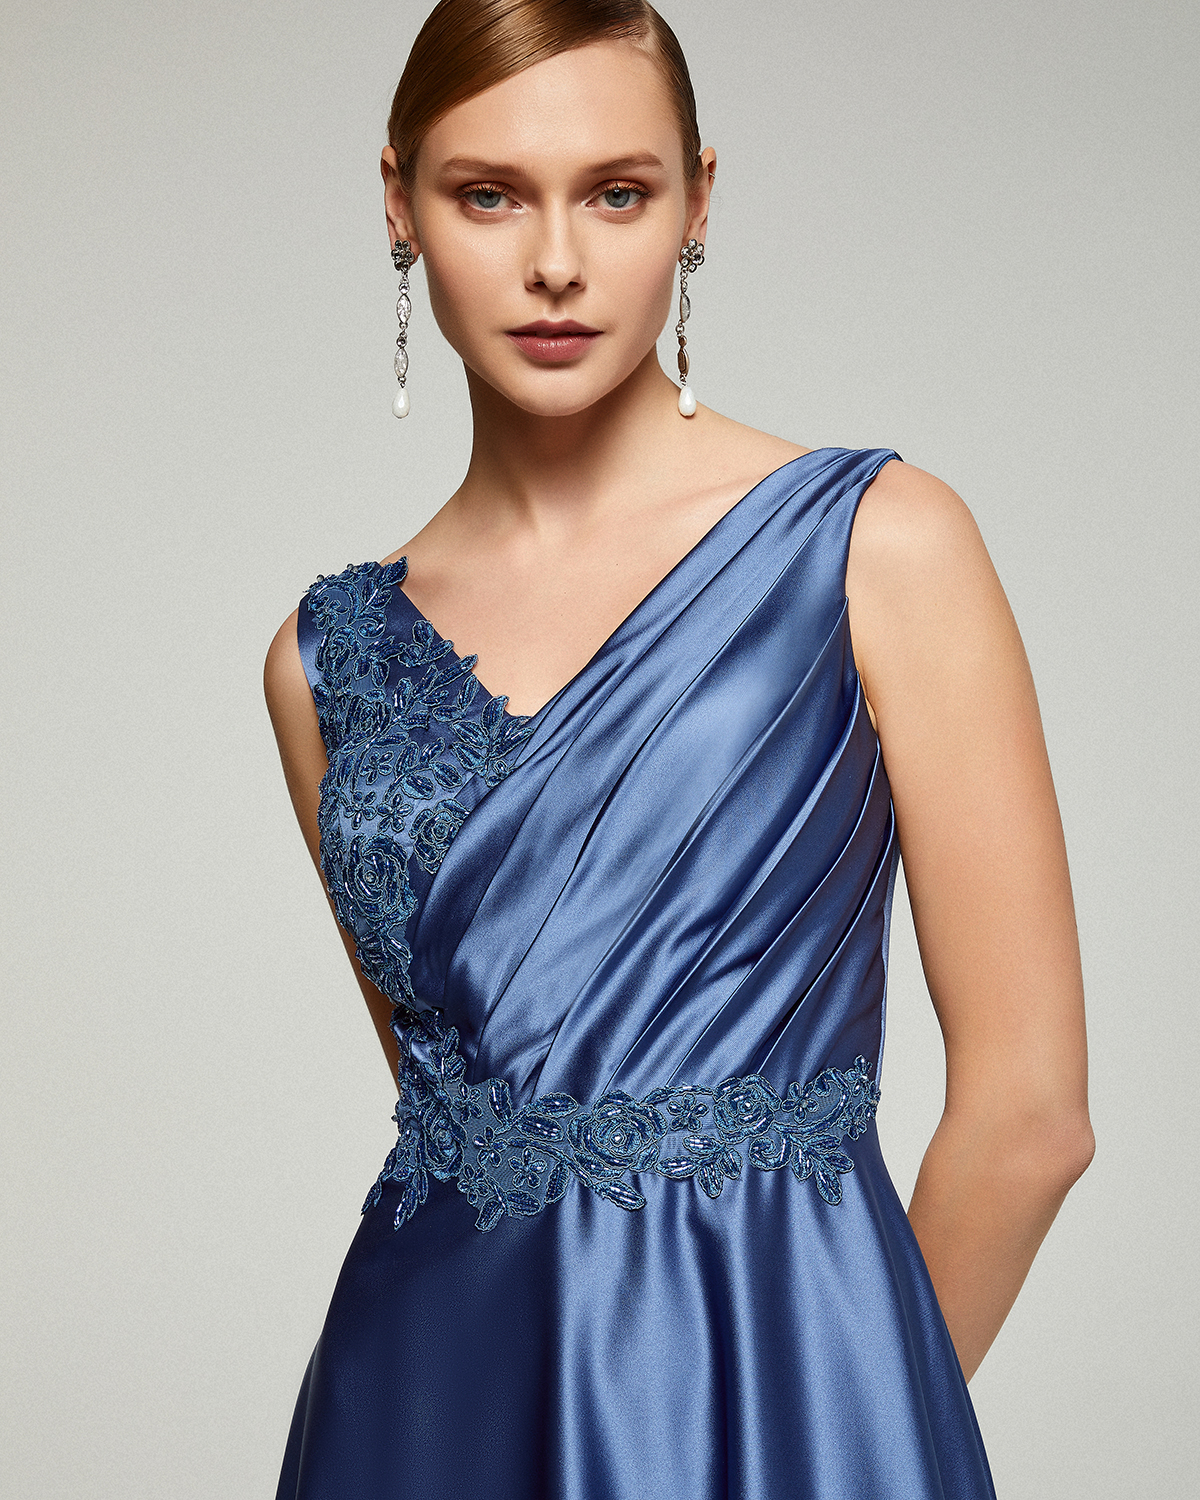 Classic Dresses / Long evening satin dress for the mother of the bride